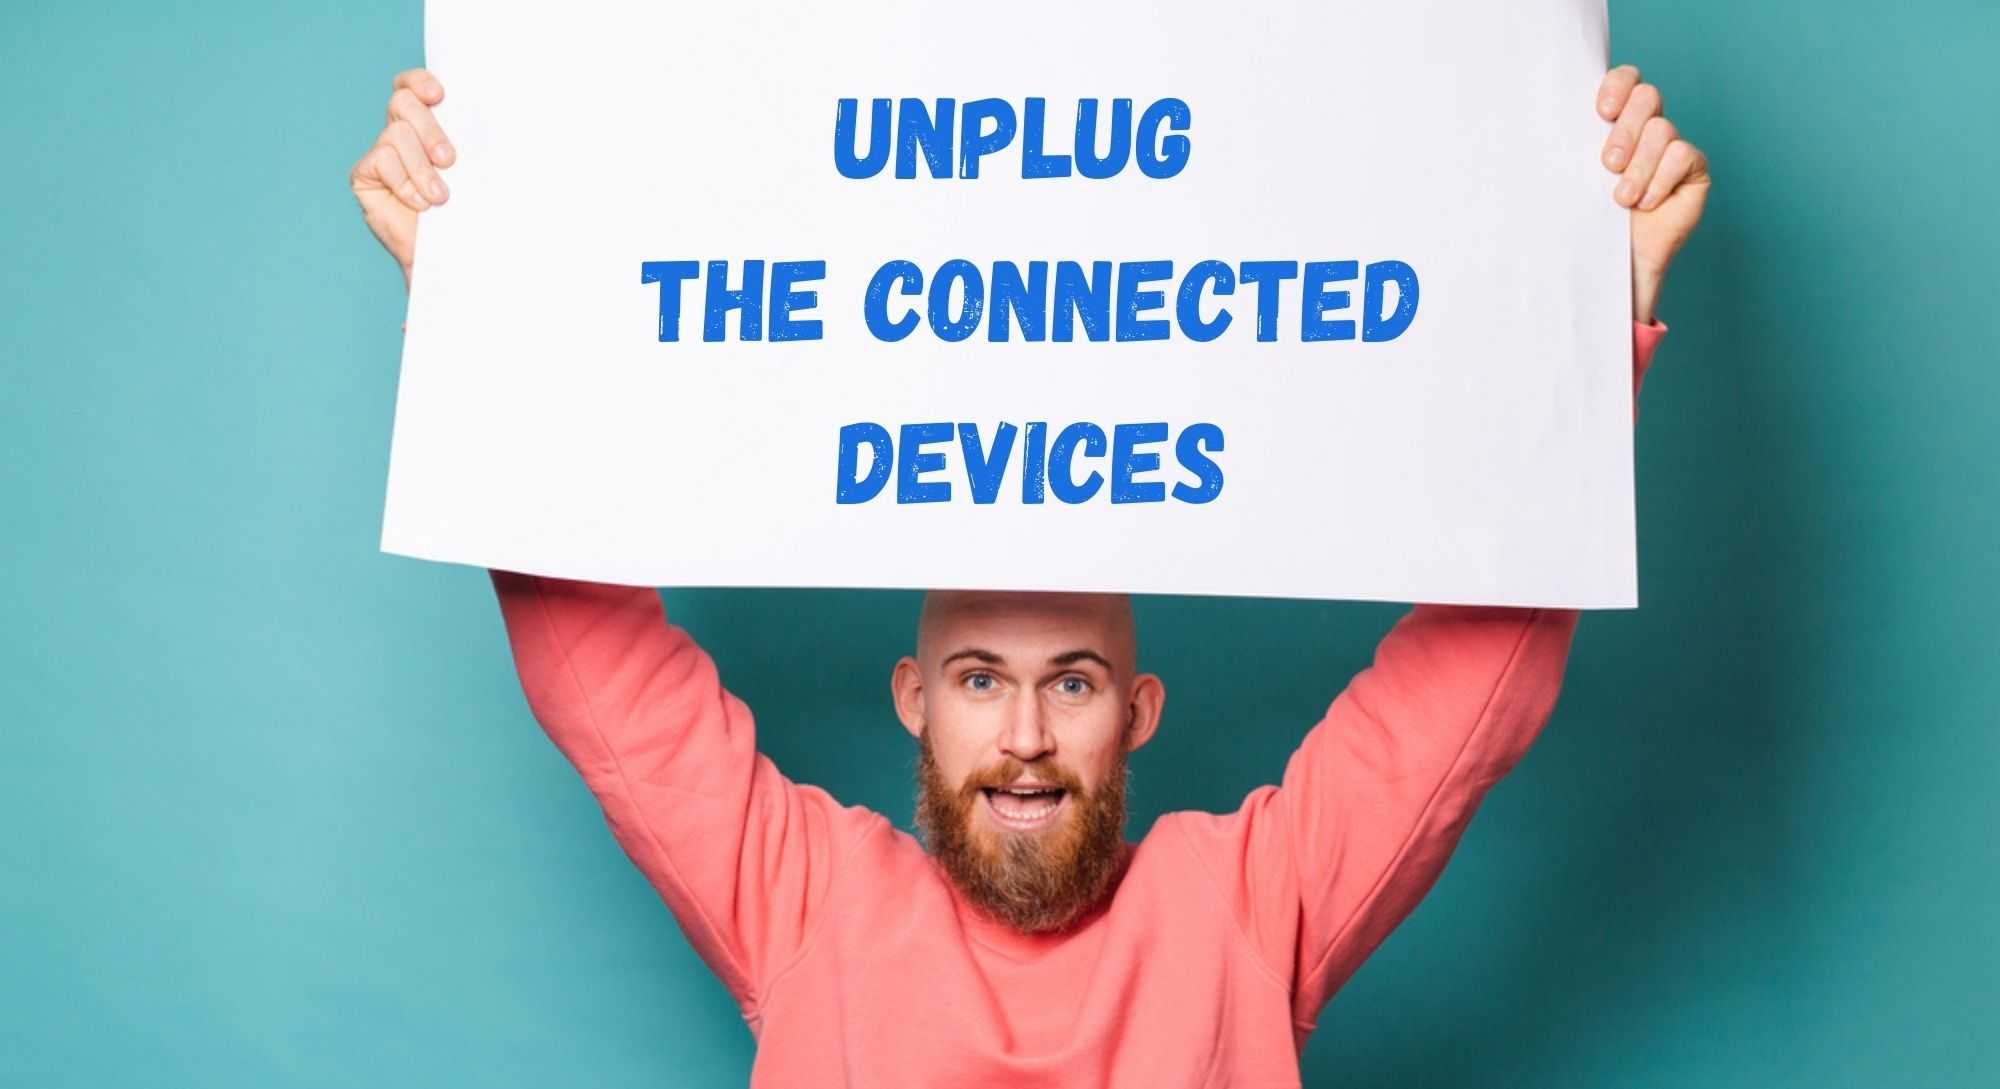 Unplug the connected devices